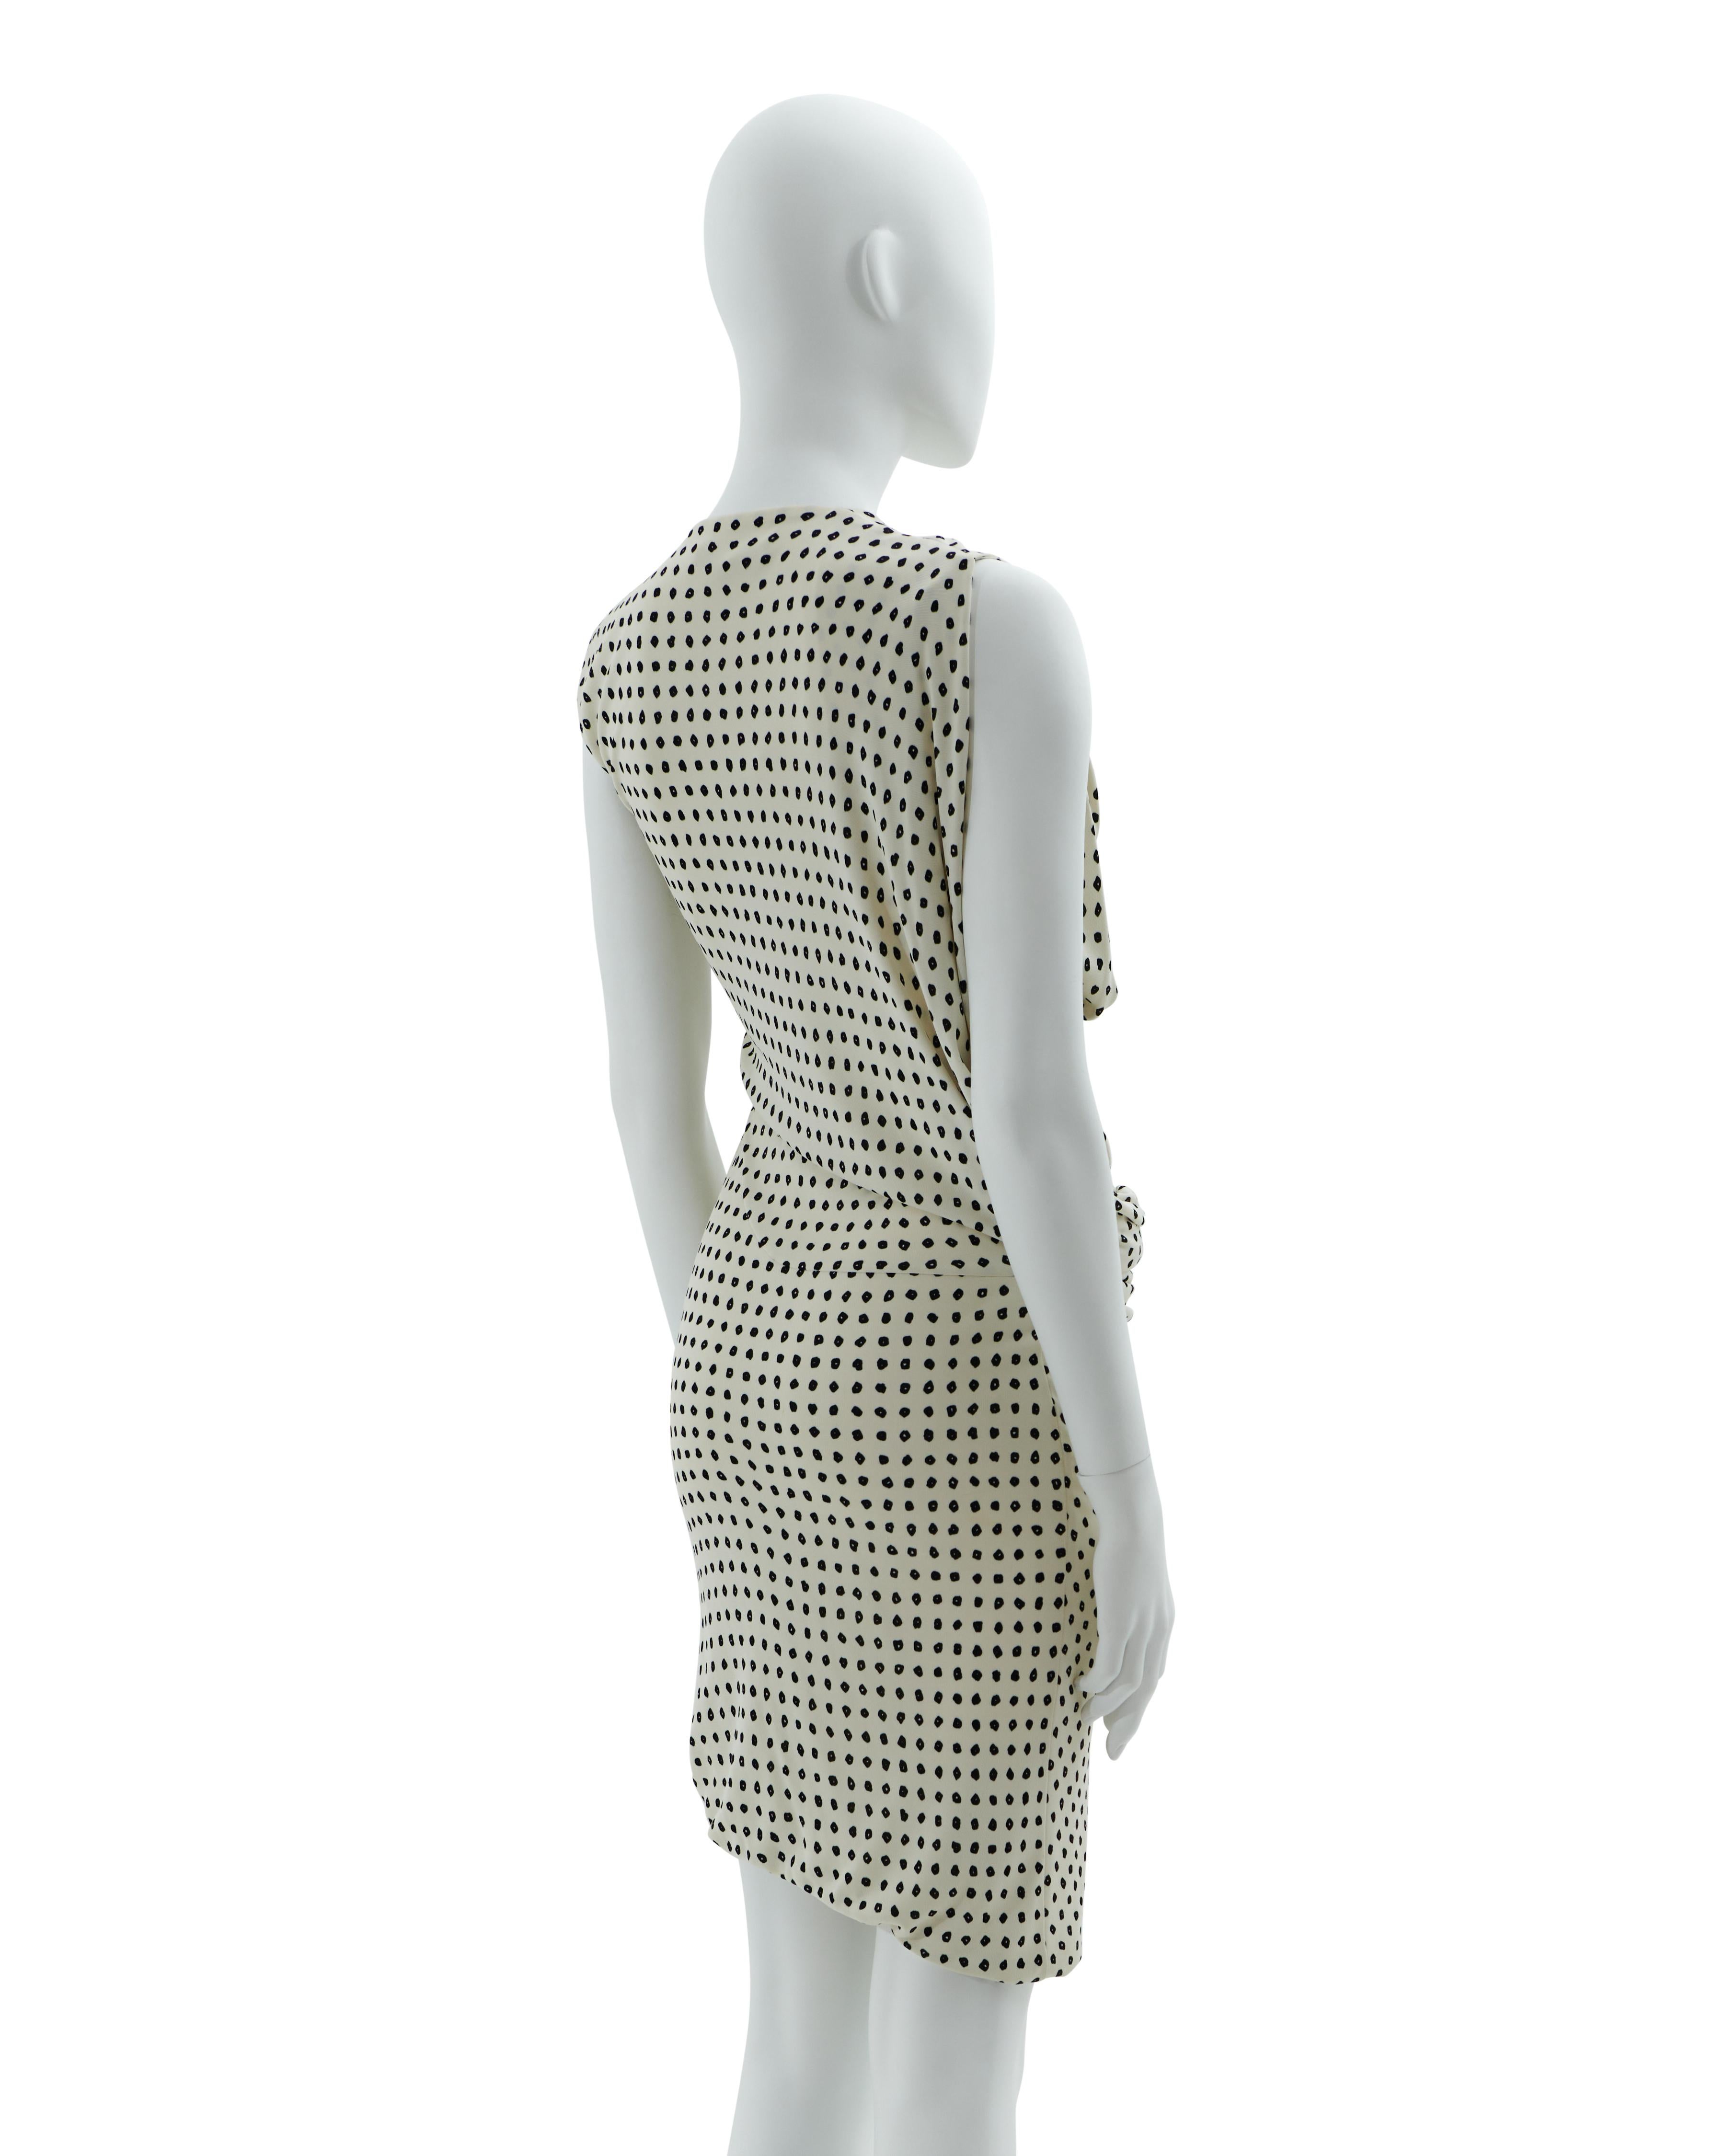 Balenciaga by Nicolas Ghesquière Resort 2009 b&w asymmetric cocktail dress In Good Condition For Sale In Milano, IT